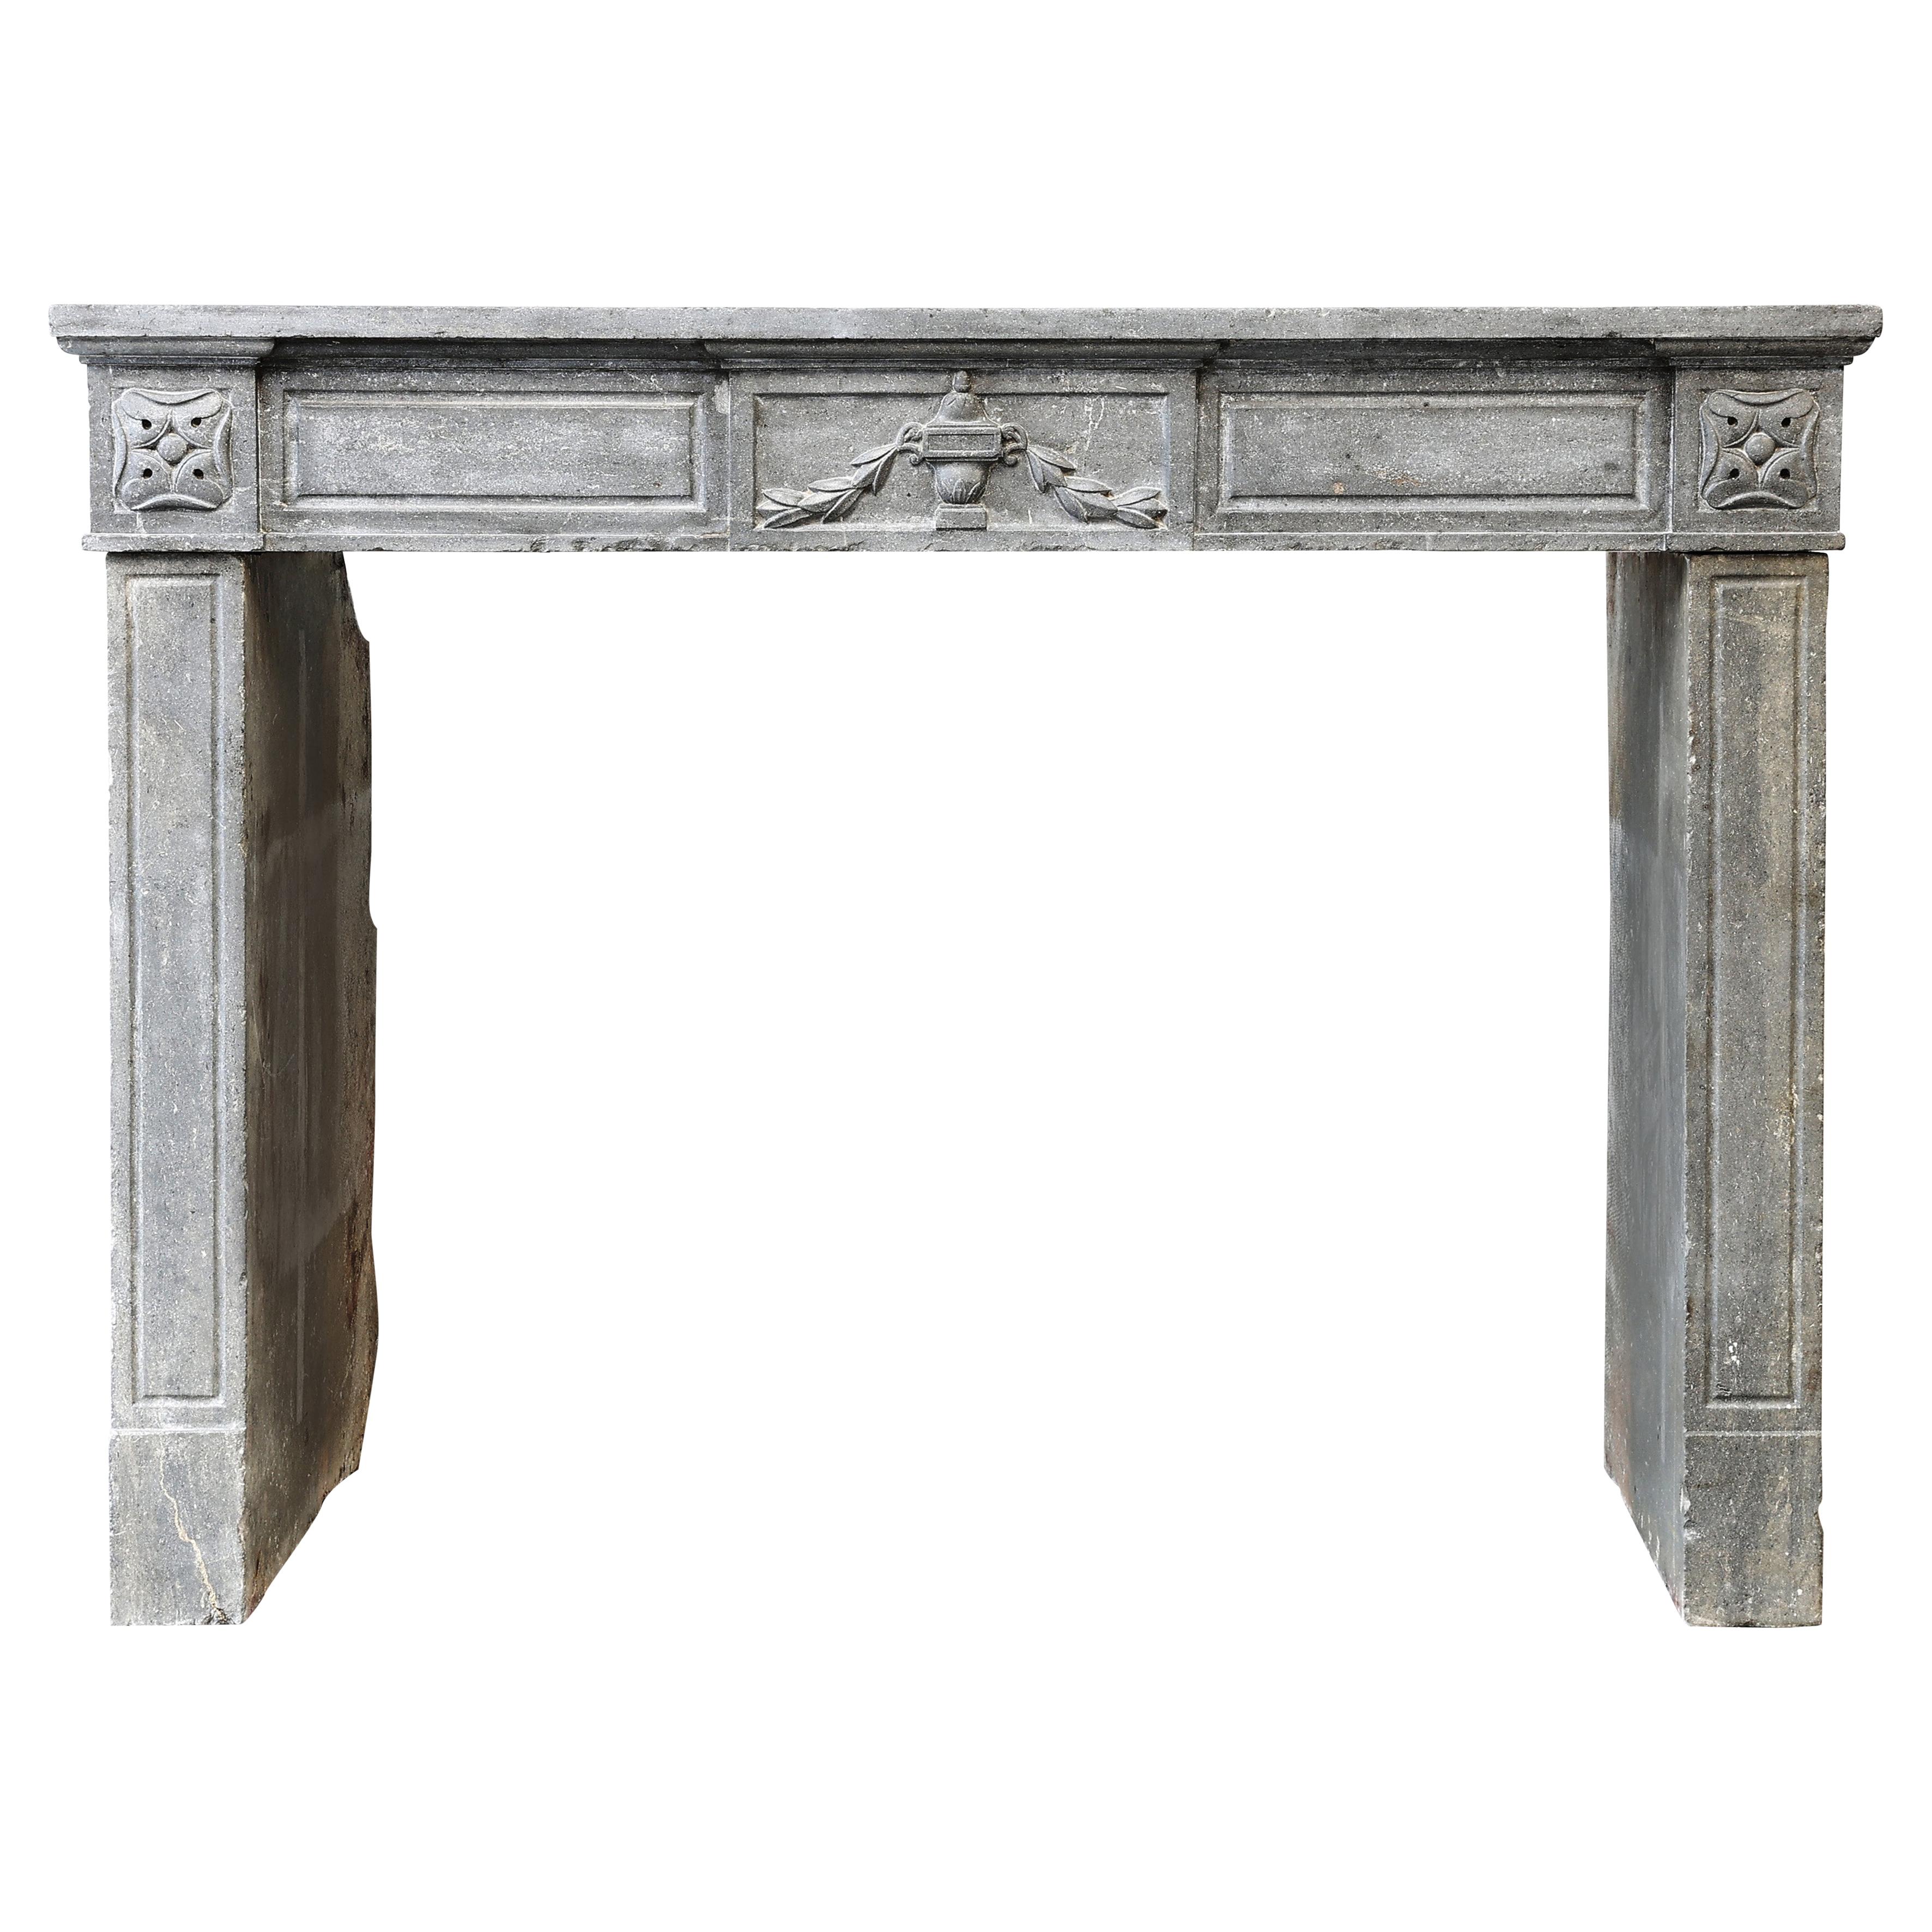 19th Century Mantel Piece in Style of Louis XVI of Gray Marble Stone